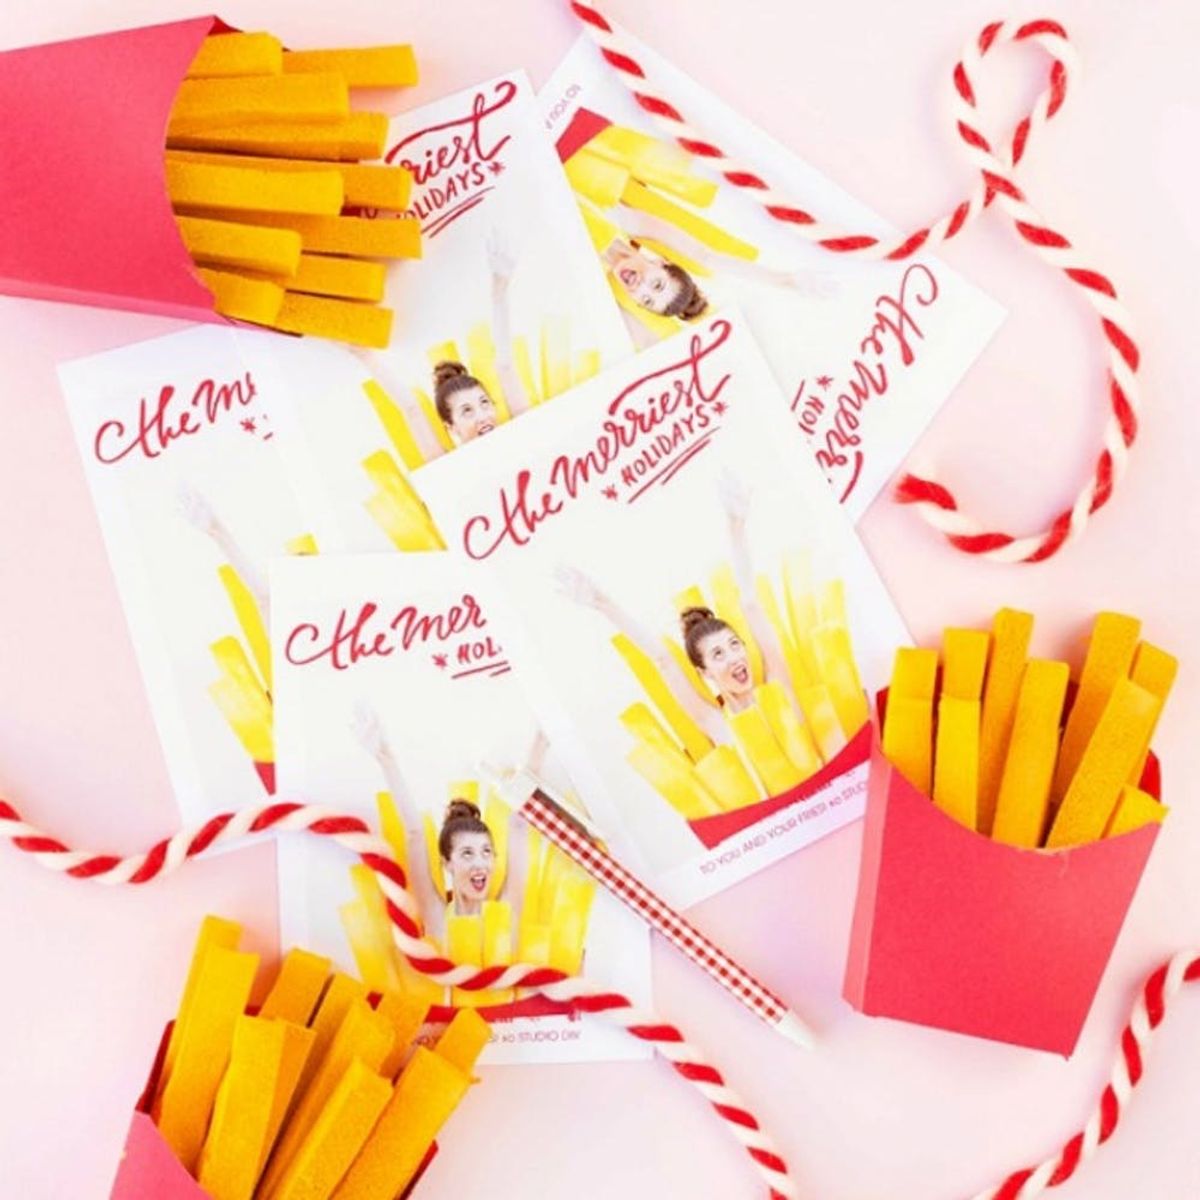 14 DIY Holiday Cards to Spread *All* the Holiday Cheer